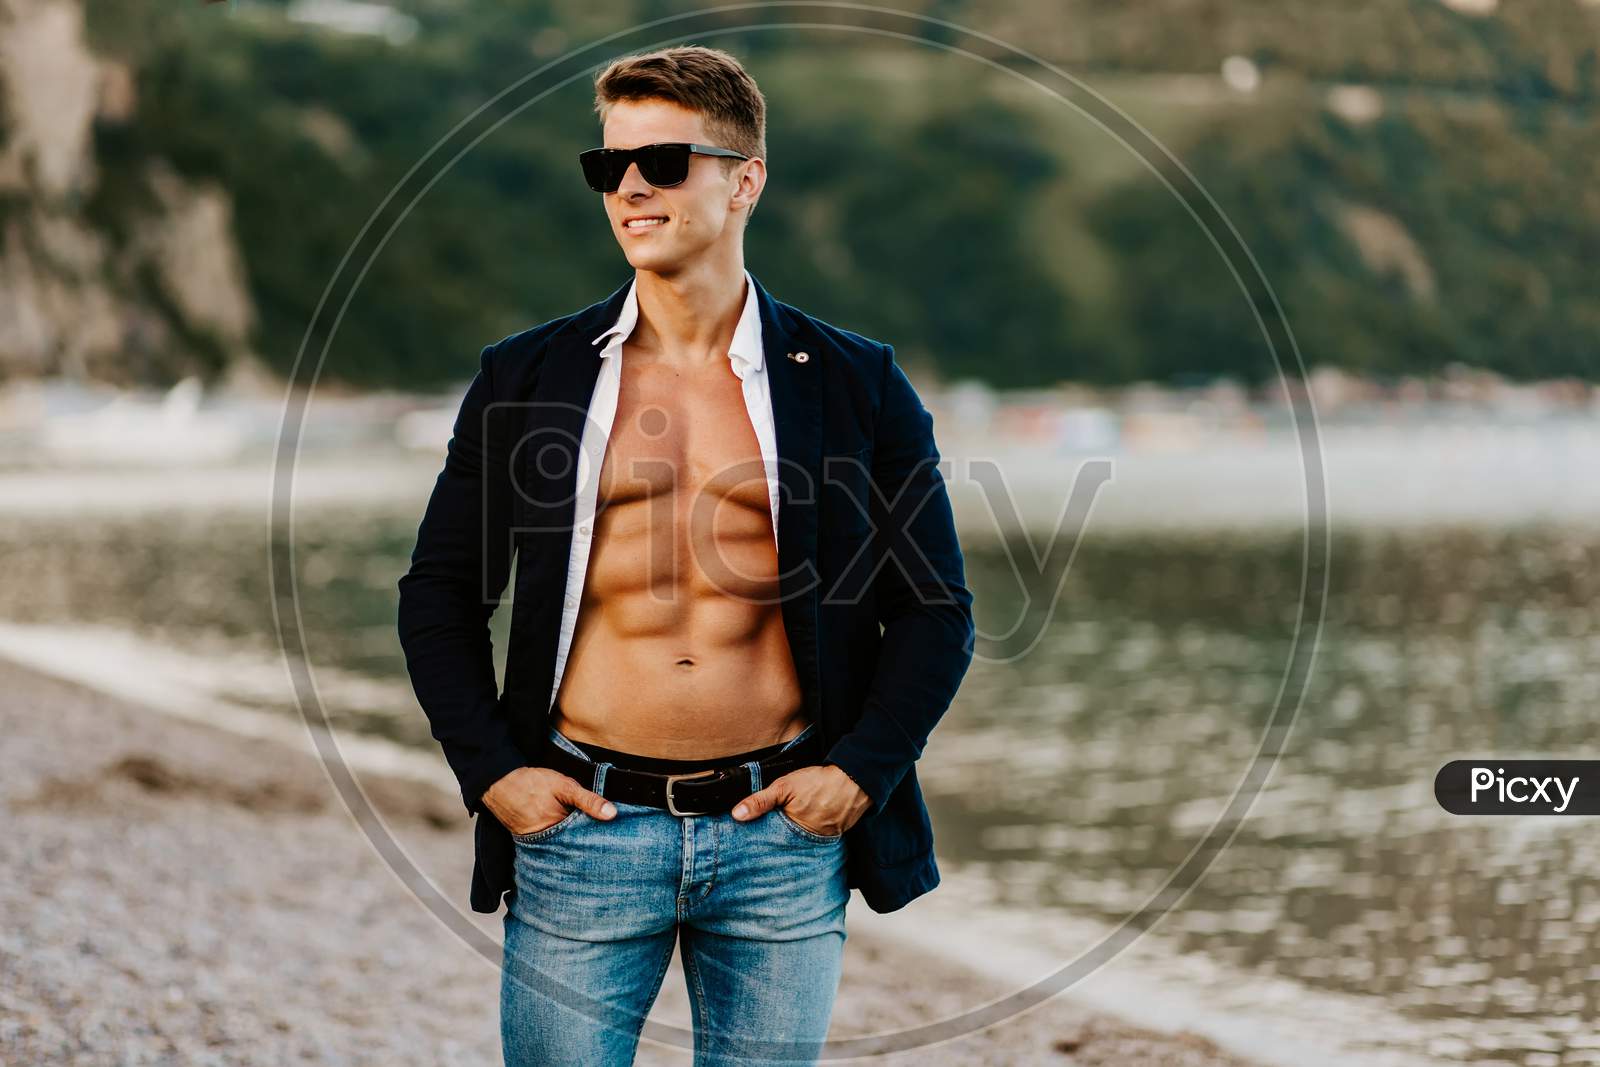 Stylish Muscular Handsome Man Wearing Jacket And Sunglasses Outdoors